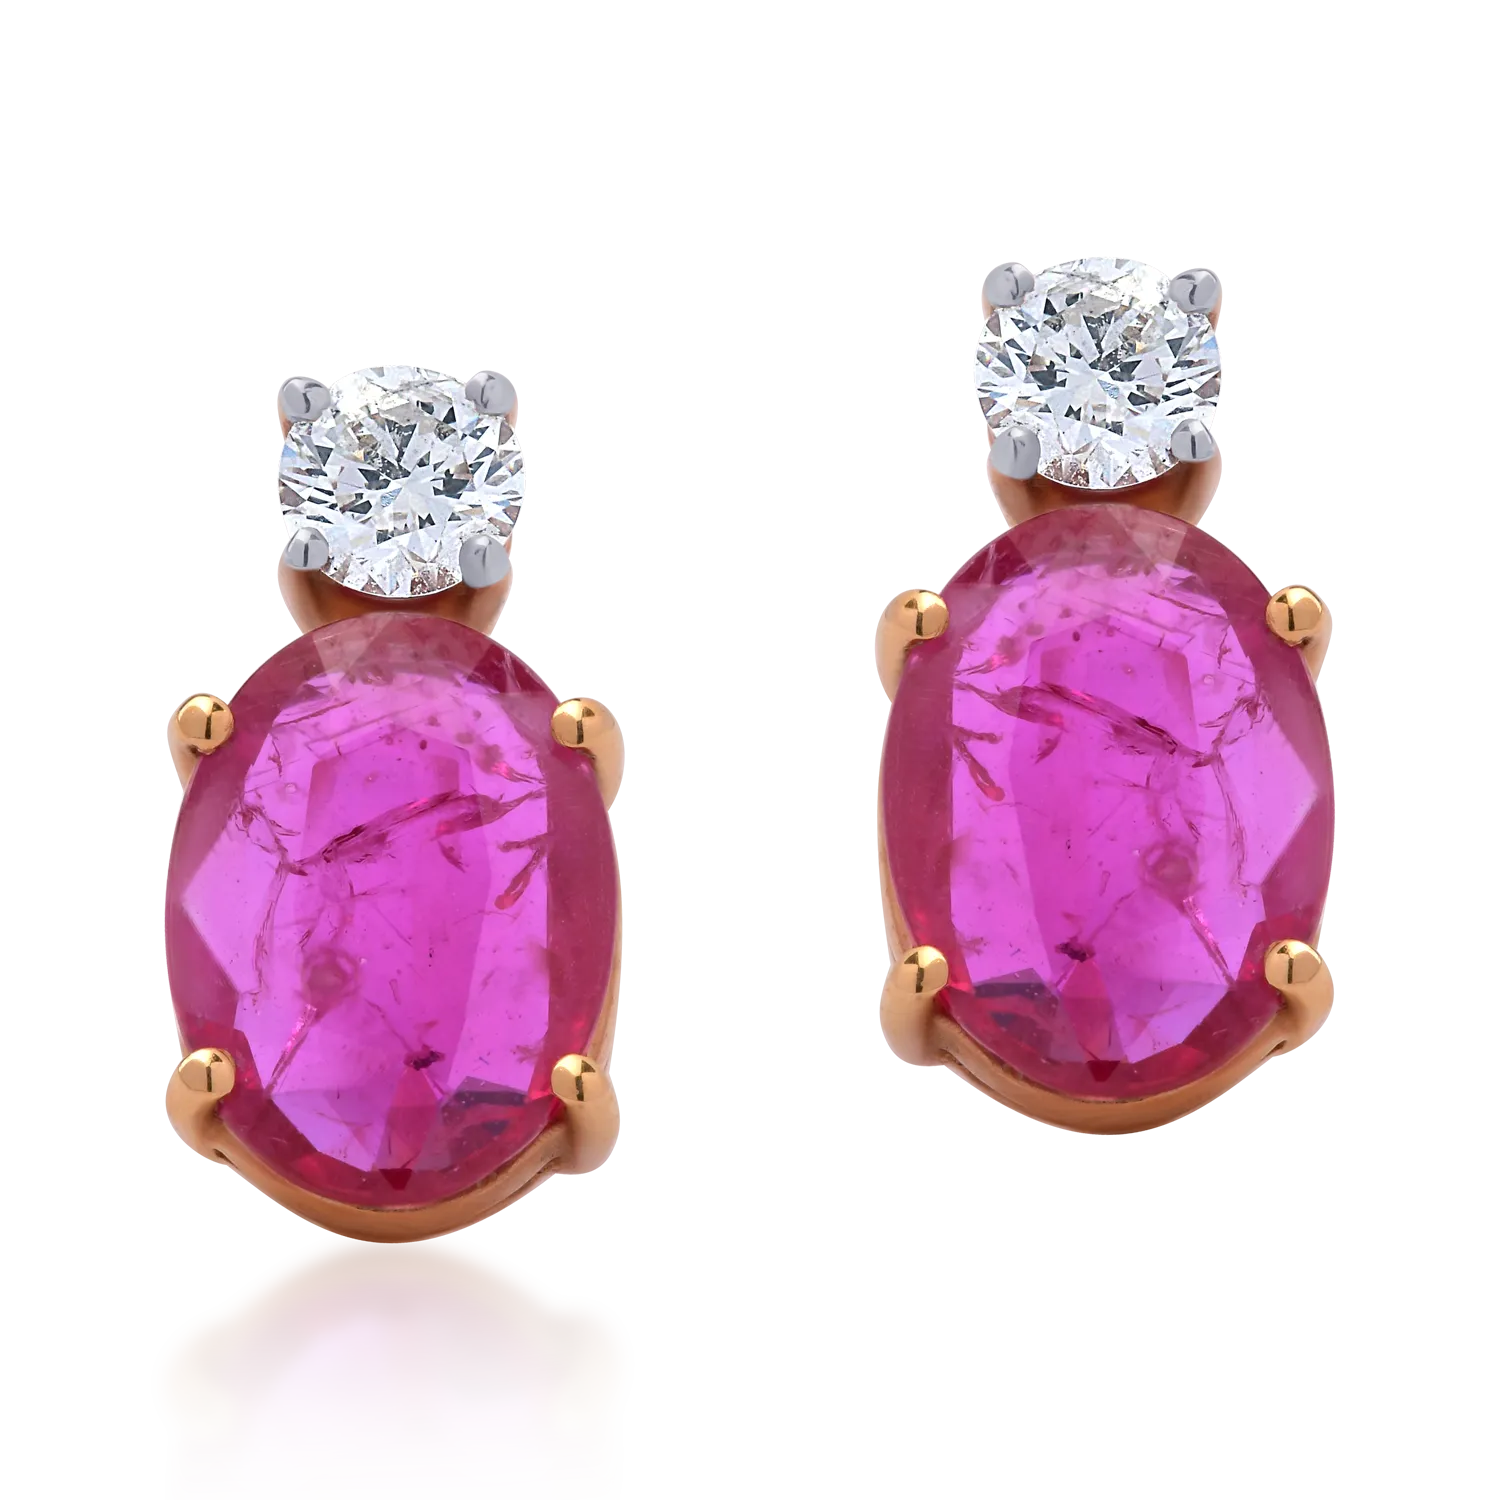 18K rose gold earrings with 1.75ct rubies and 0.26ct diamonds